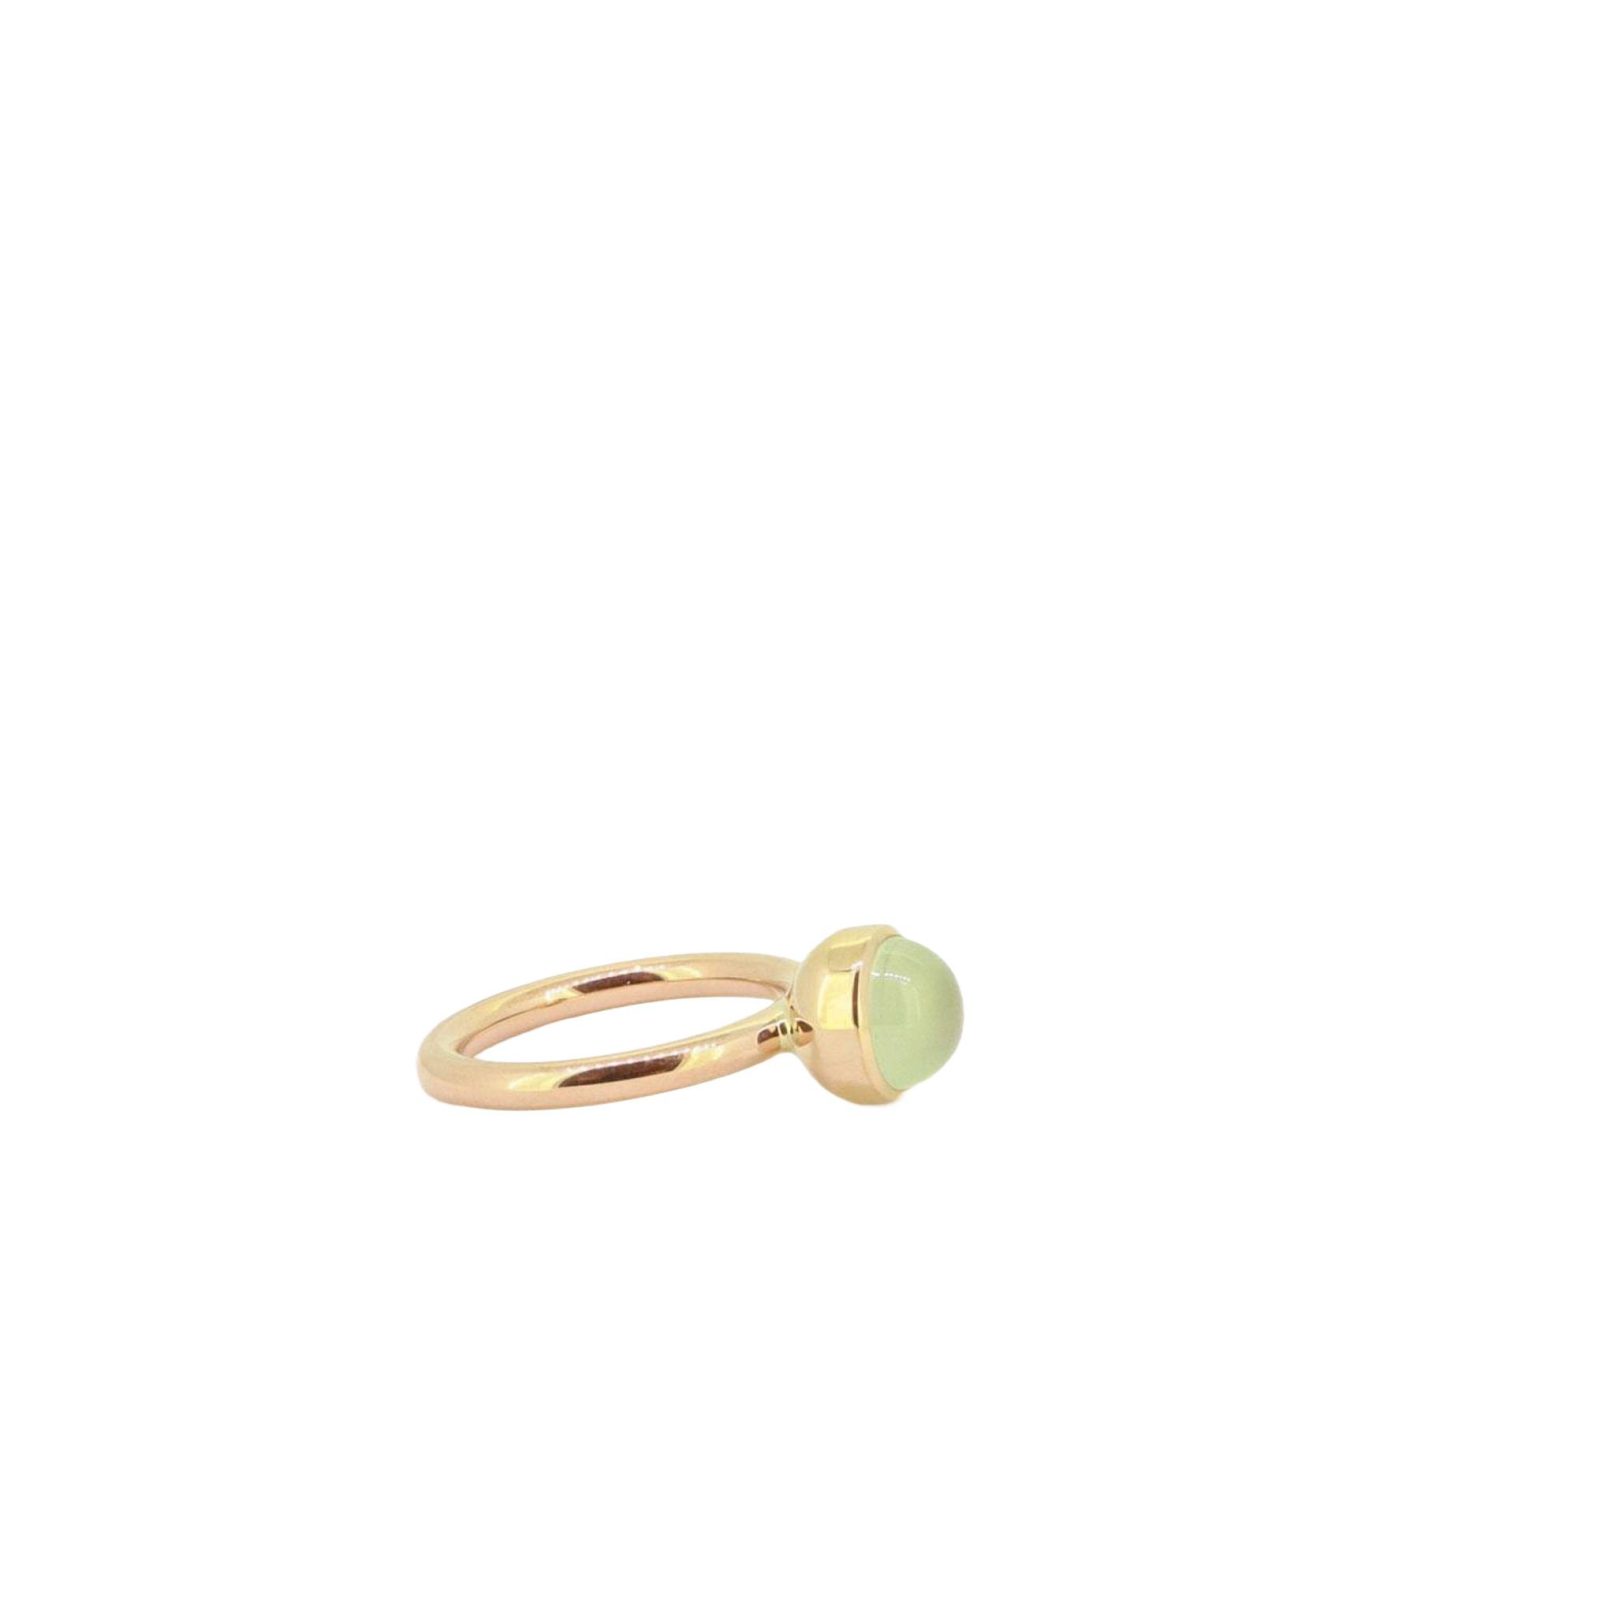 Ring Twiggy 8mm Prehnit Rotgold - Georg Spreng - 421spre09-5A